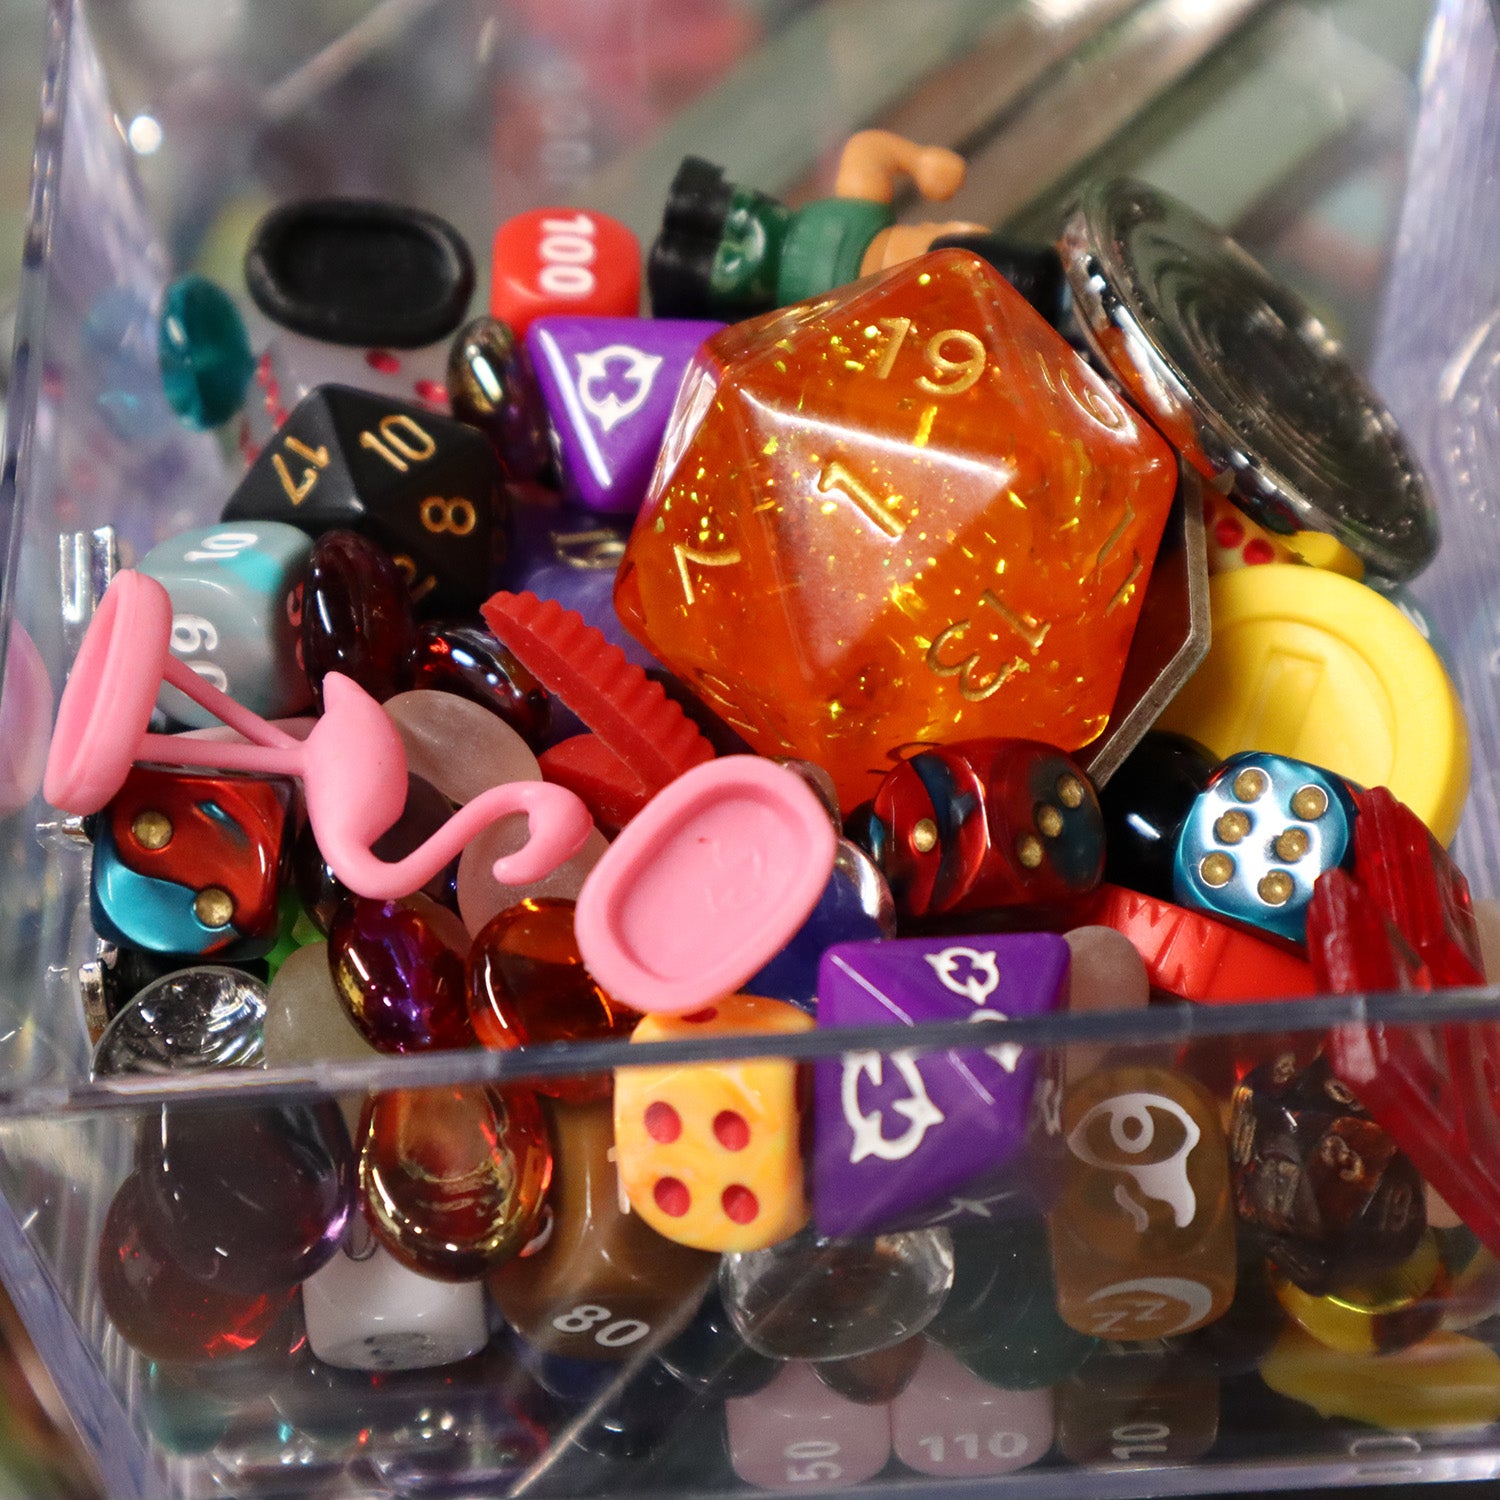 Close up of the grab bag dice and tricket boxes made by the geek peek. Showing mixture of dice and tokens.